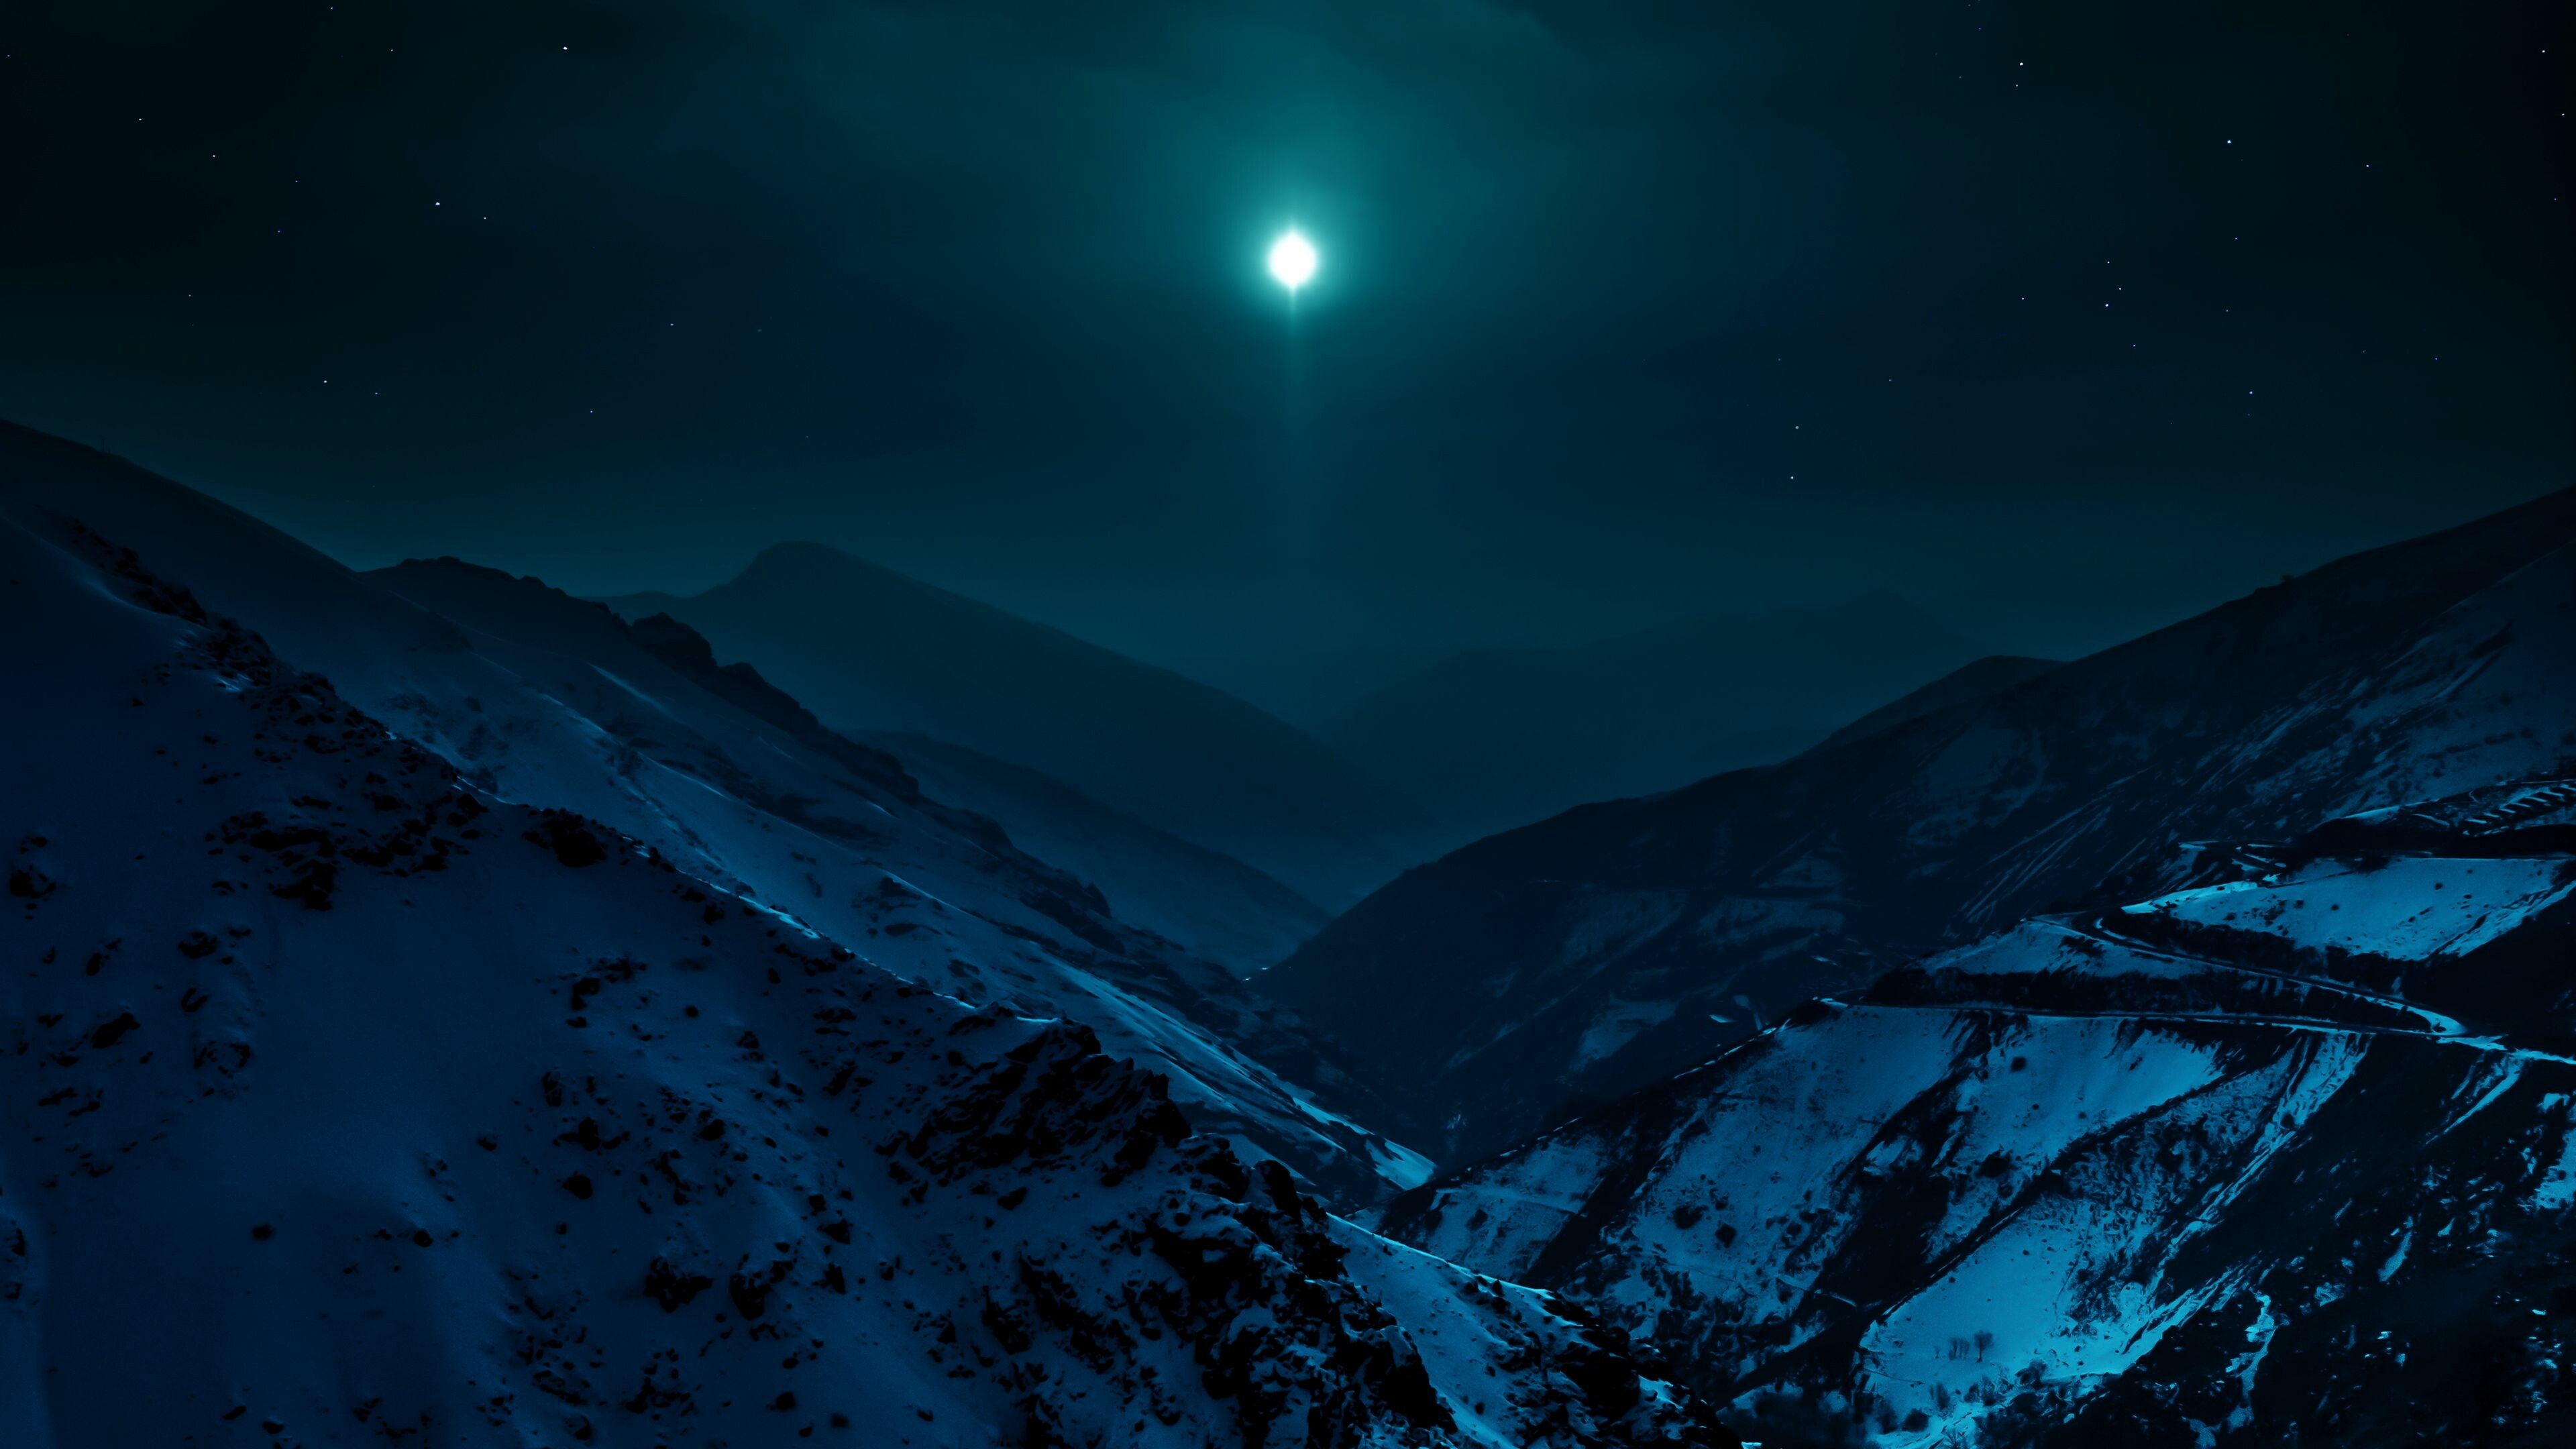 Moonlight: Night, The time from dusk to dawn when no sunlight is visible, Mountain landscape. 3840x2160 4K Wallpaper.